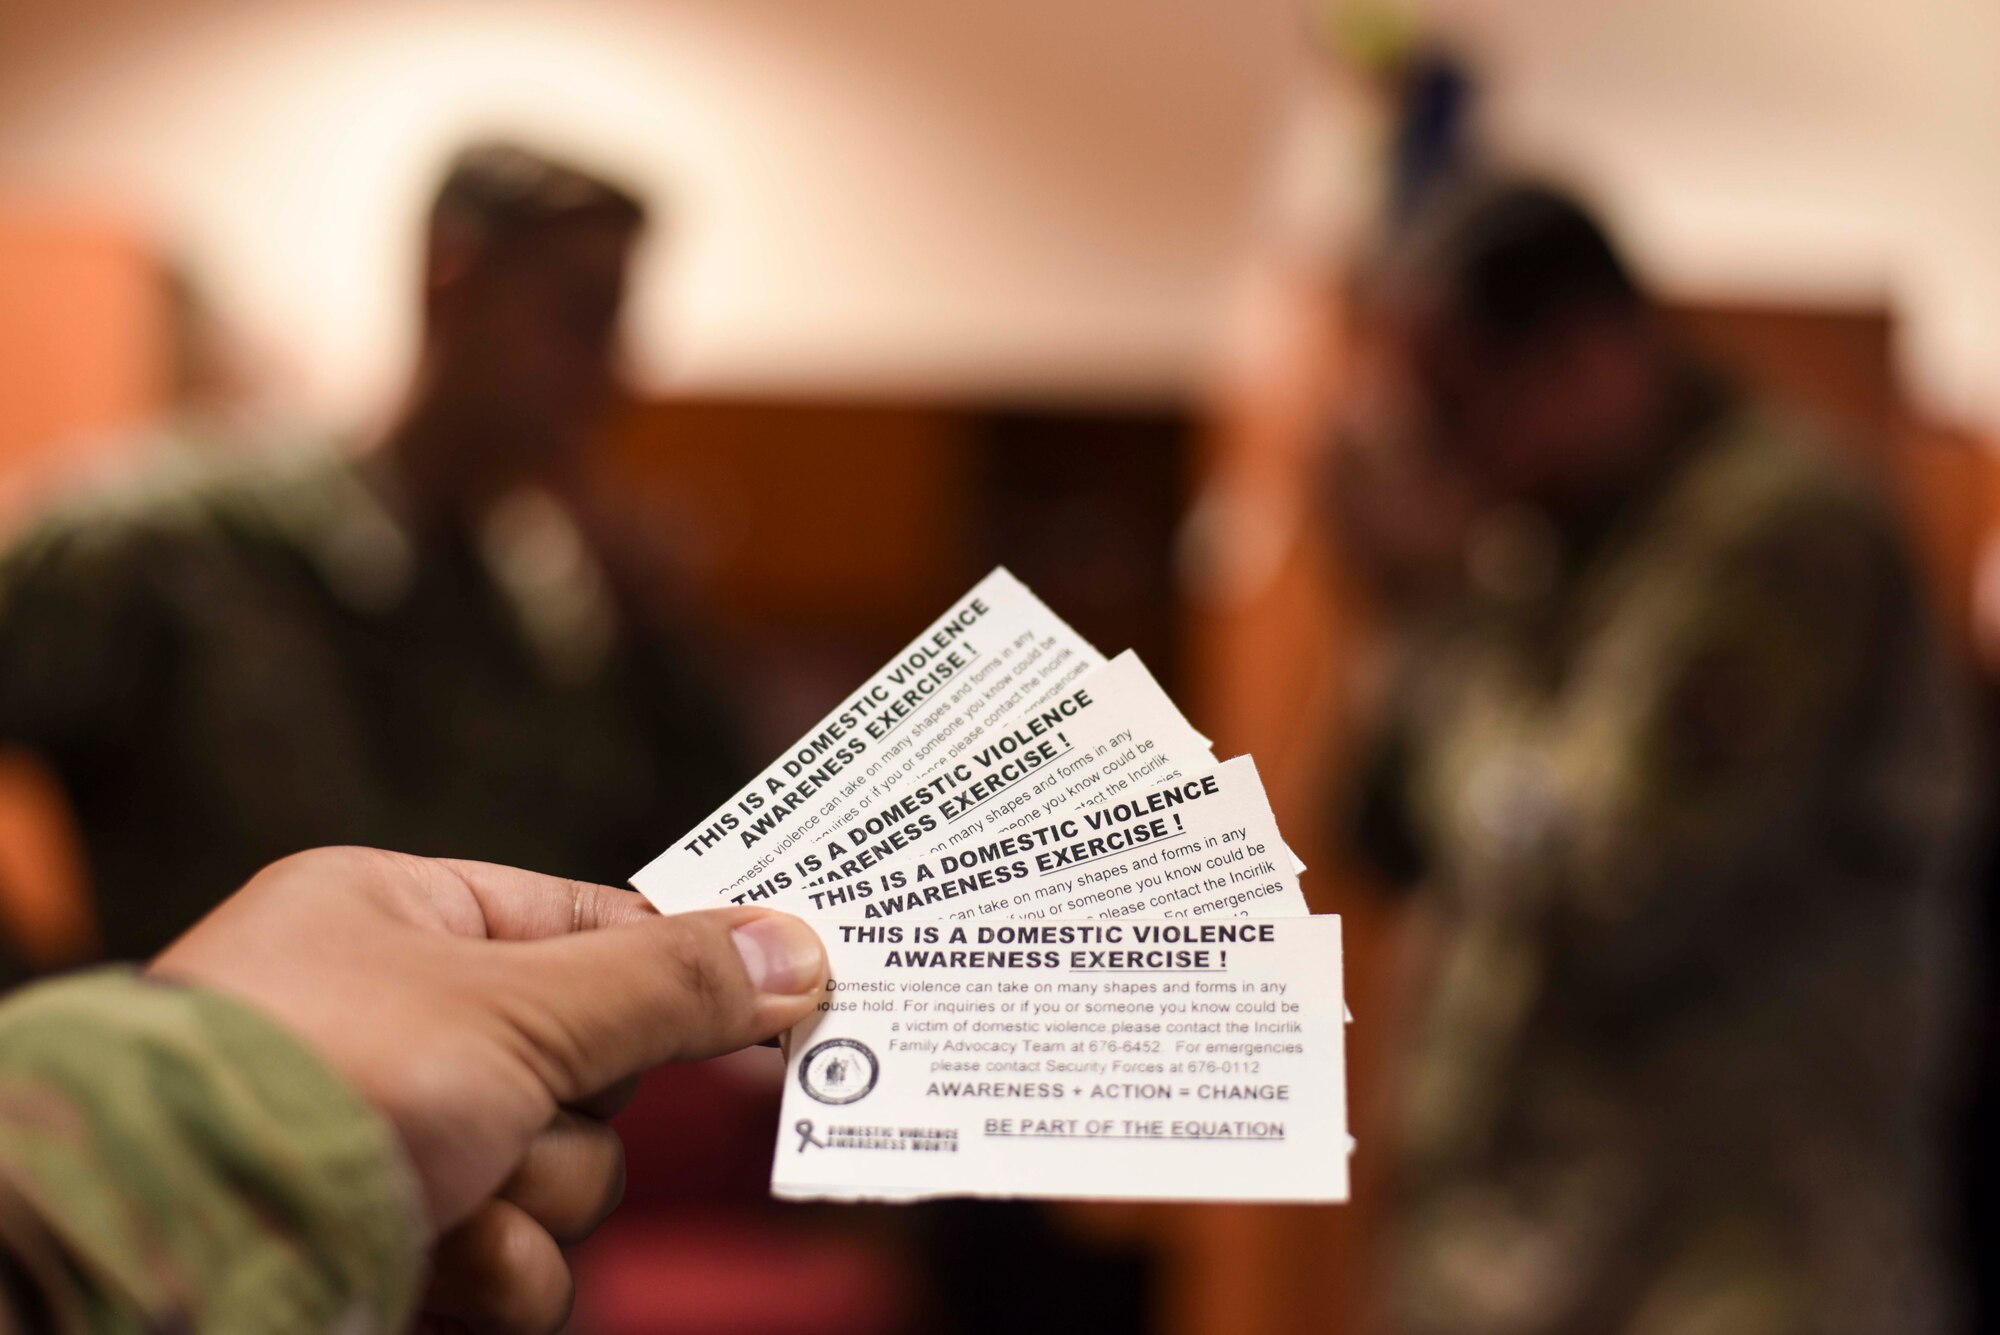 Domestic violence awareness leaflets are seen against a background of two Airmen involved in a simulated intervention Oct. 10, 2019, at Incirlik Air Base, Turkey. The 39th Air Base Wing conducted a domestic violence awareness exercise to initiate responses from bystanders around the installation. (U.S. Air Force photo by Staff Sgt. Joshua Magbanua)